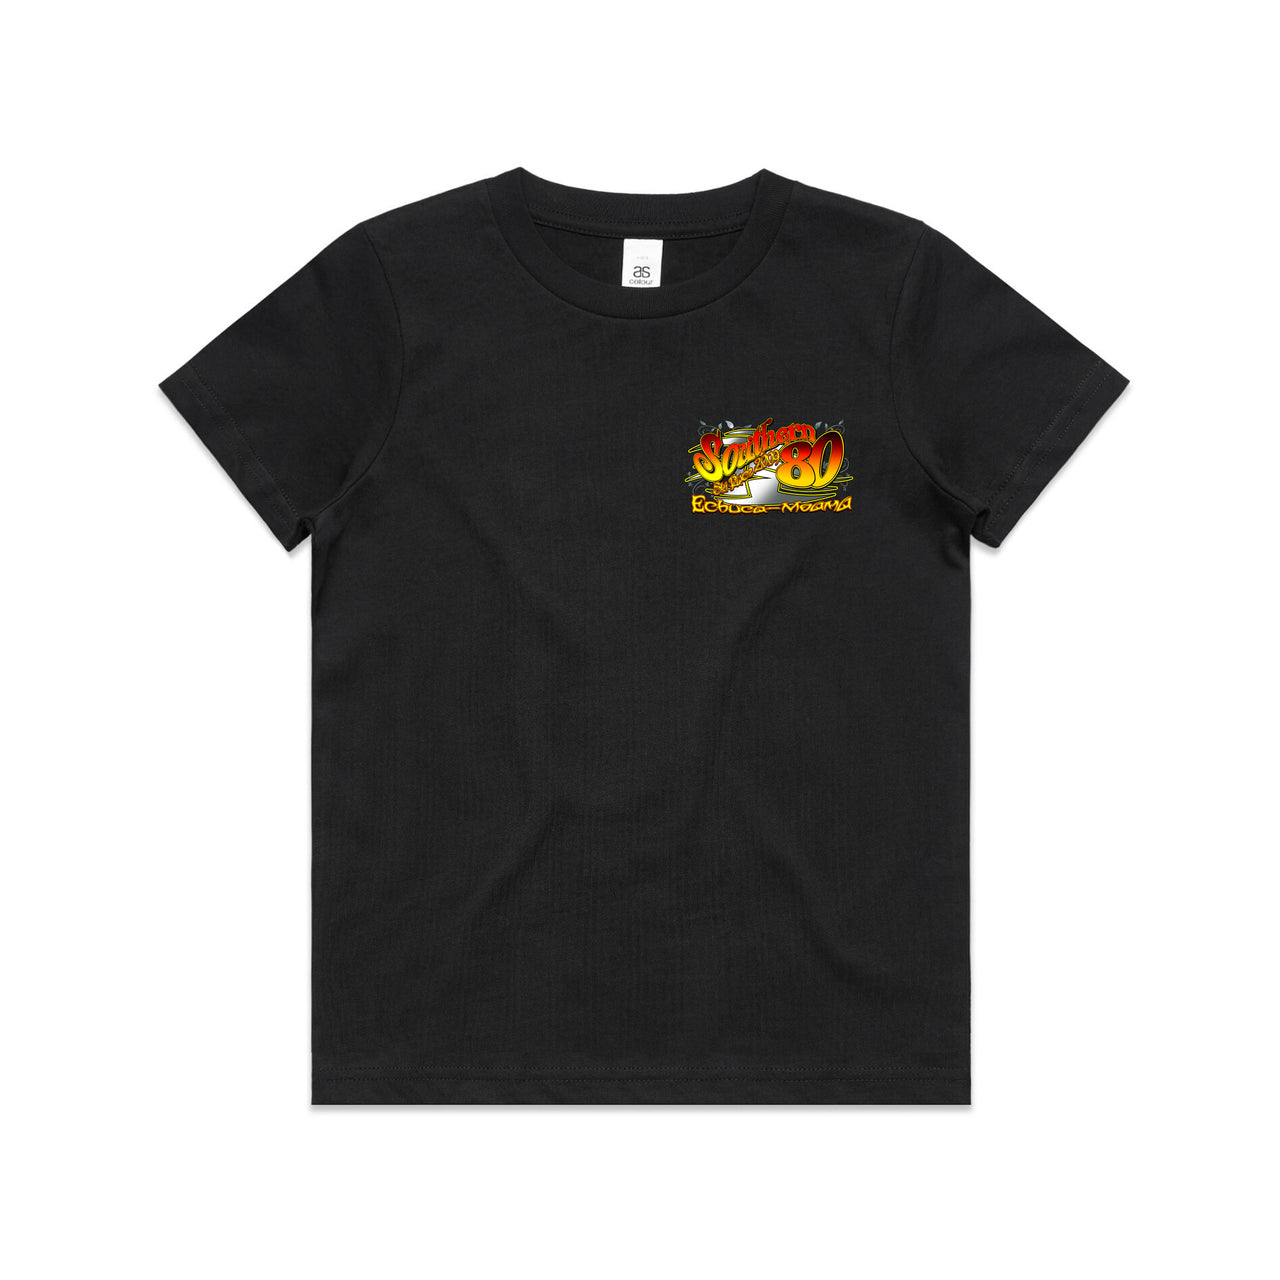 S80 2009 Hellbent Event Youth/Kids Tee